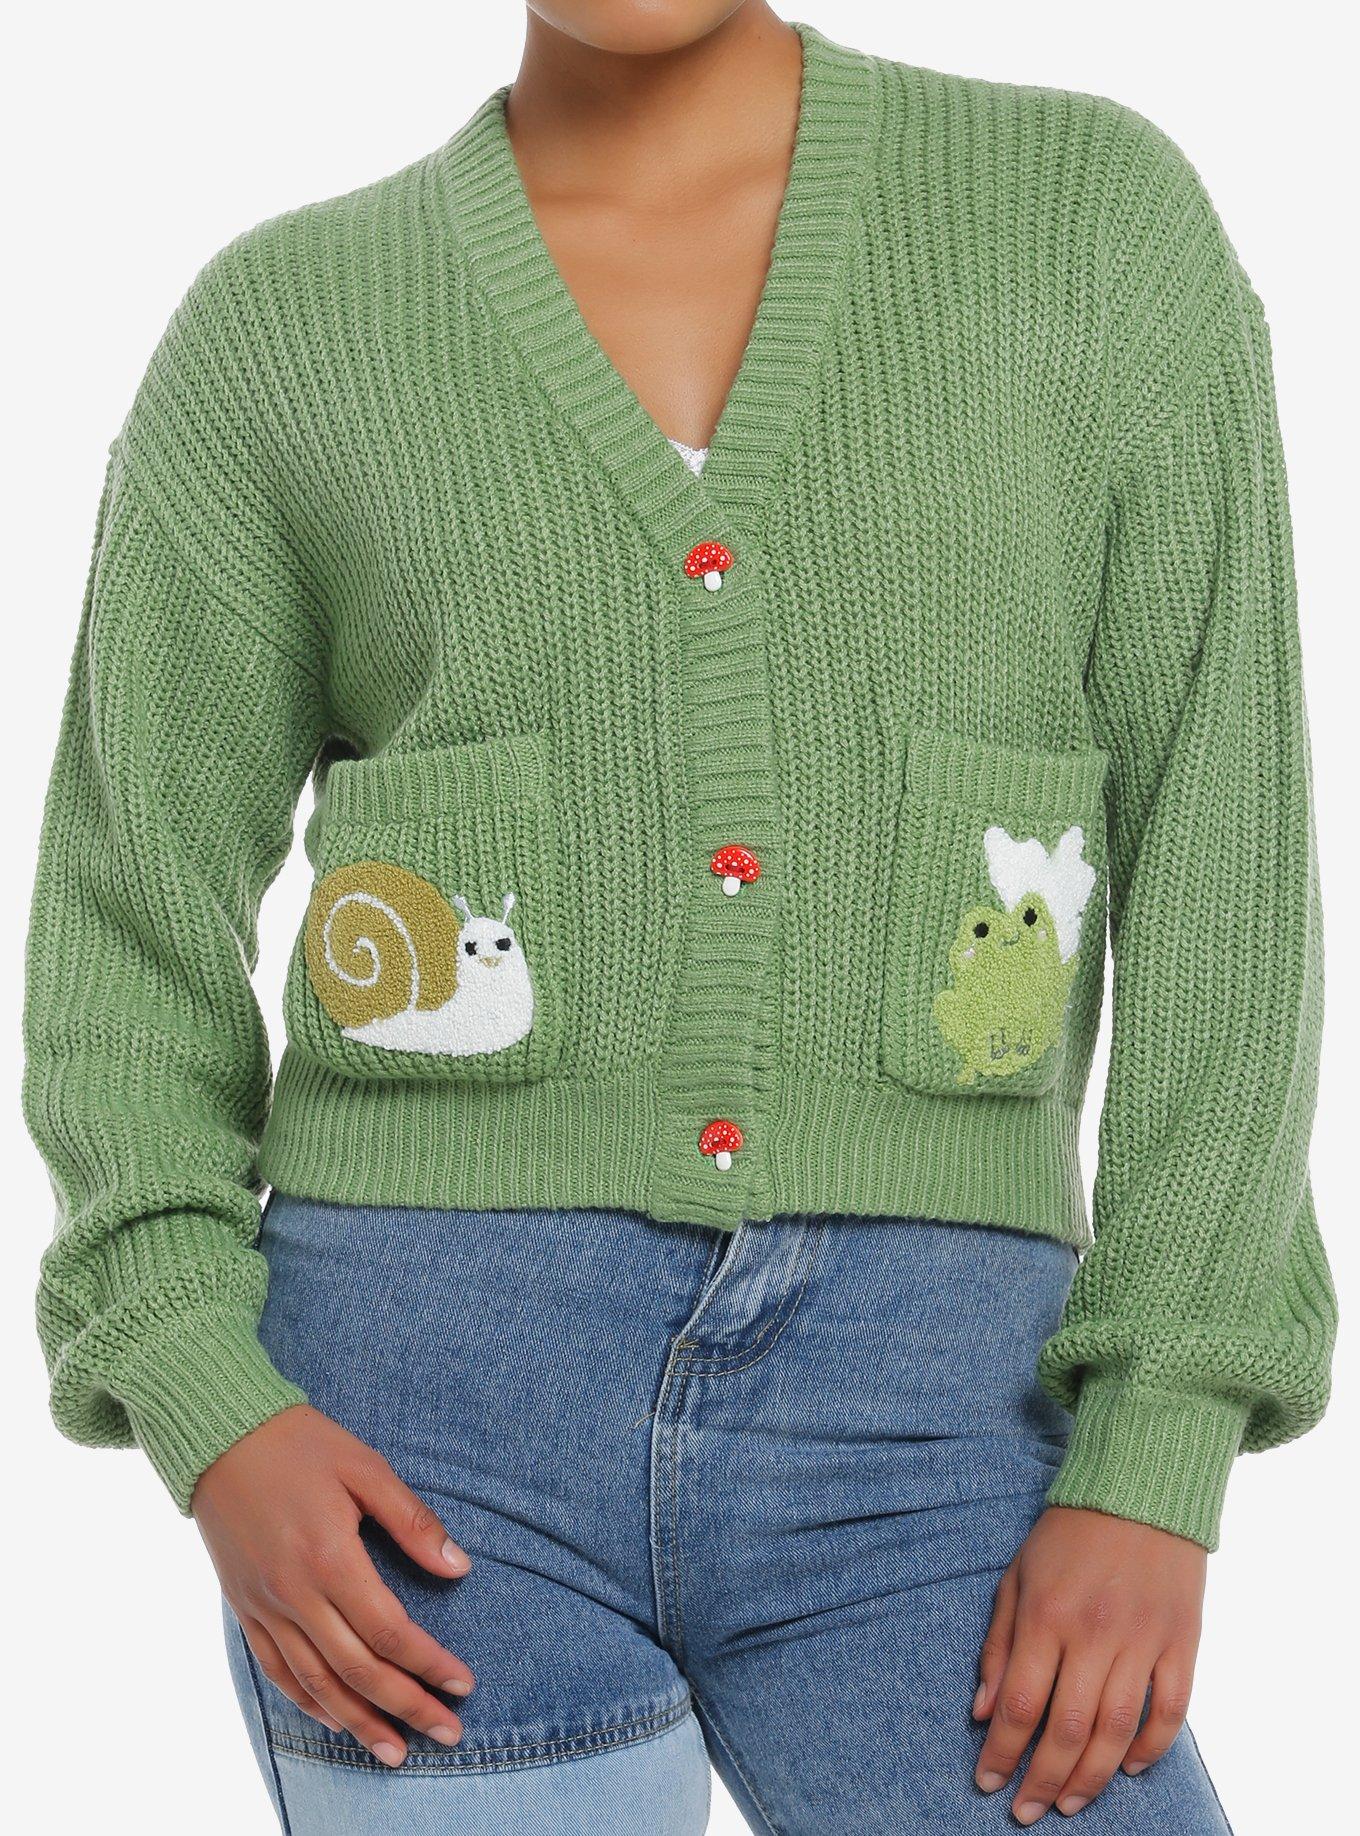 Thorn & Fable Frog & Snail Girls Crop Cardigan | Hot Topic